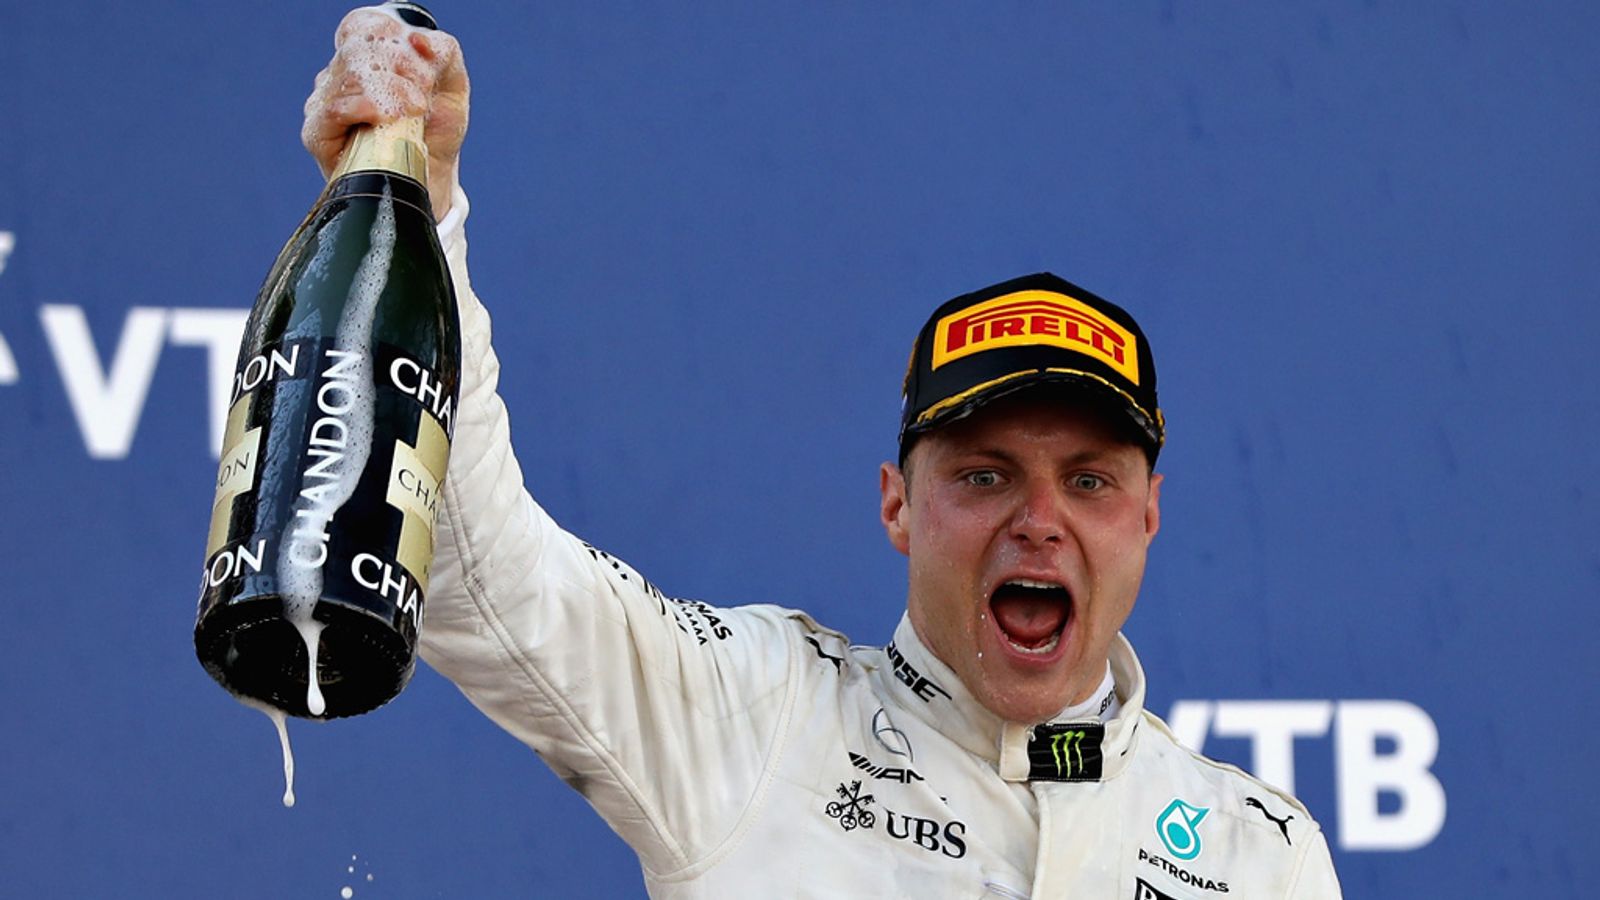 Valtteri Bottas signs contract extension with Mercedes for 2018 | F1 News